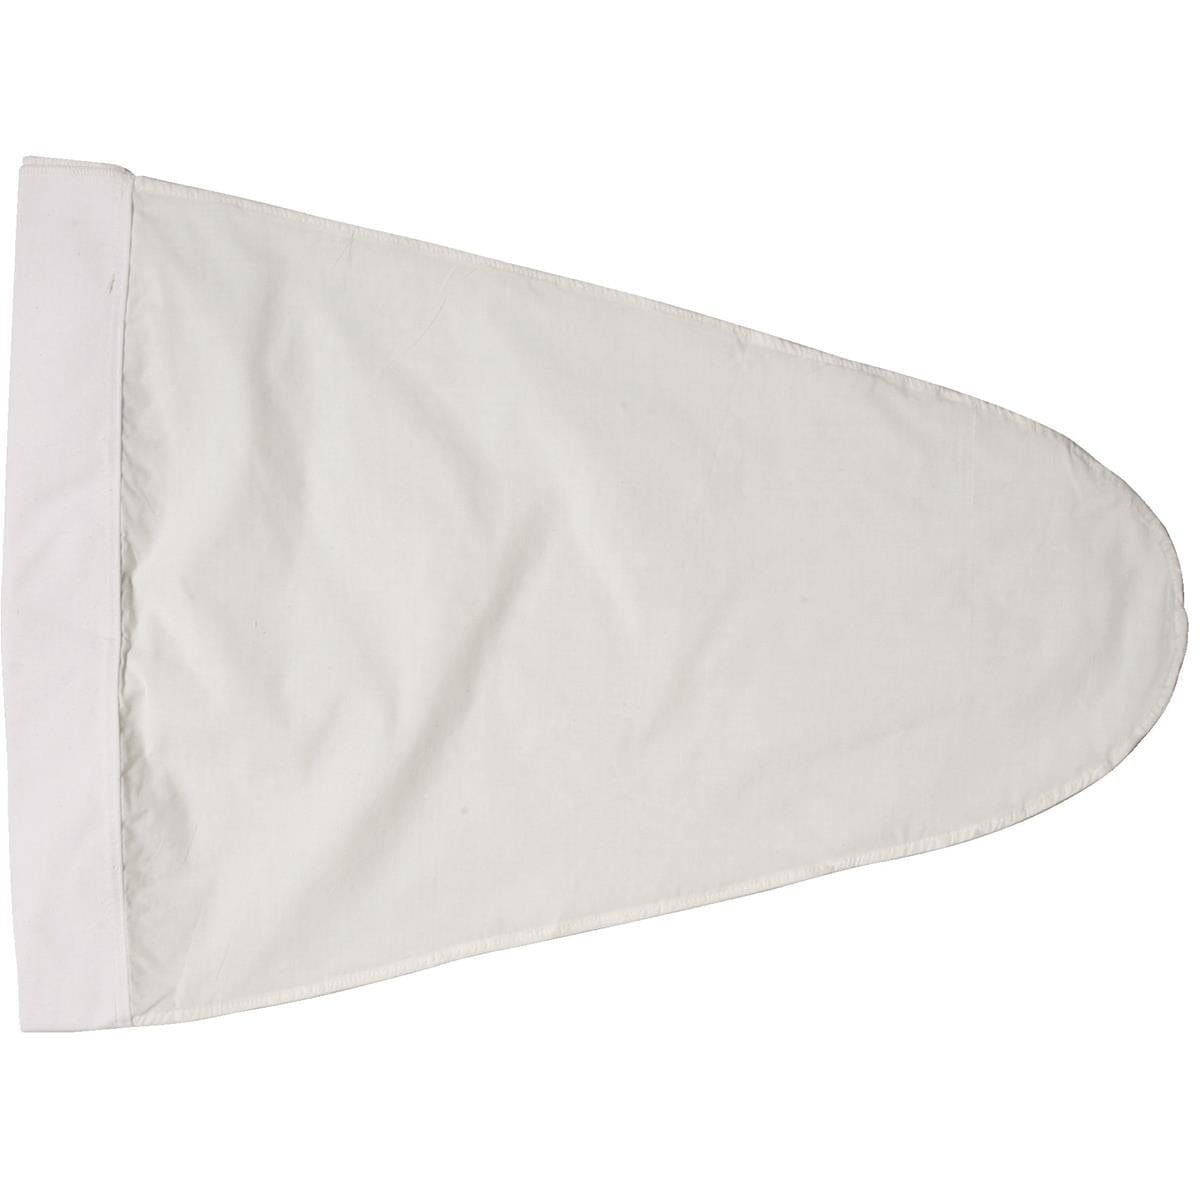 Gemplers 15"-dia. Muslin Sweep Net with Birch Handle